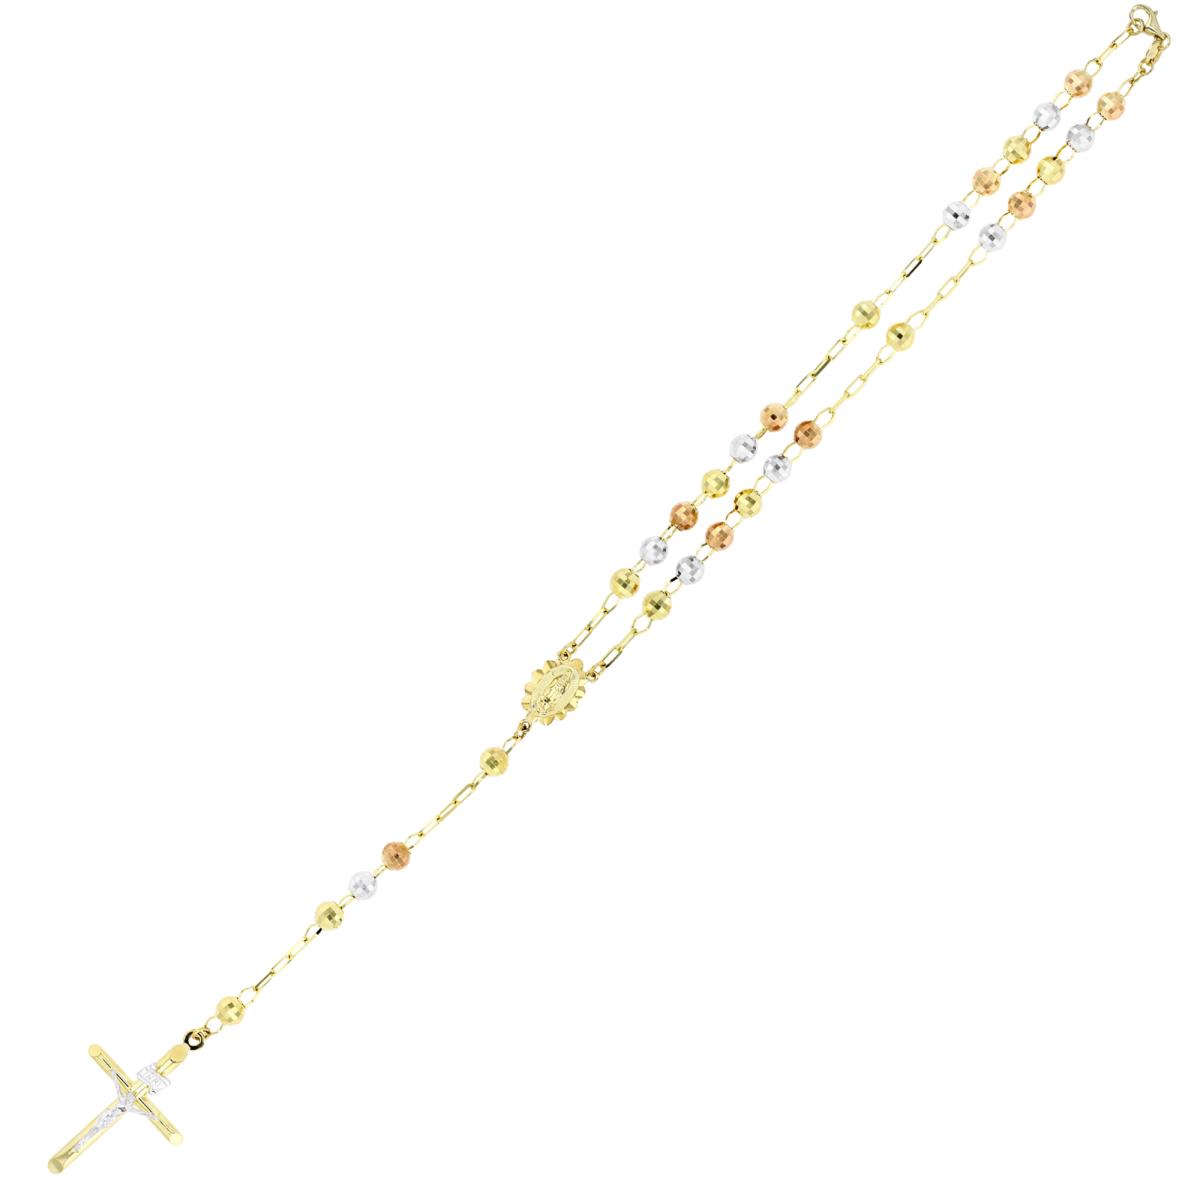 14K Gold Tricolor 5MM Diamond Cut Beads Rosary 24" Necklace